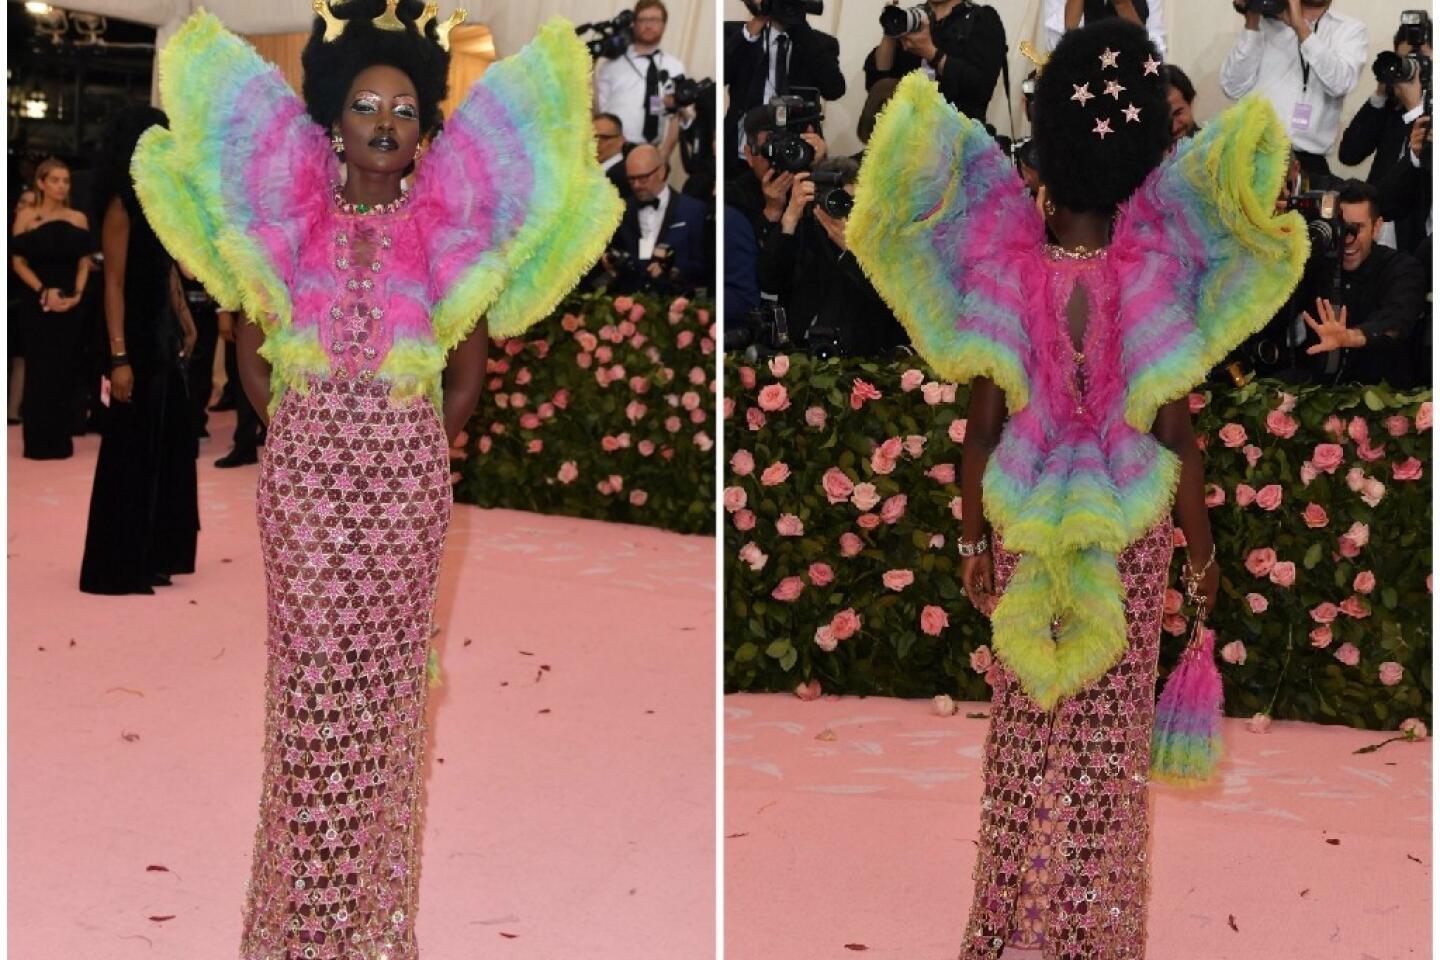 Met Gala 2019 Fun Facts from the Stars' Stylists